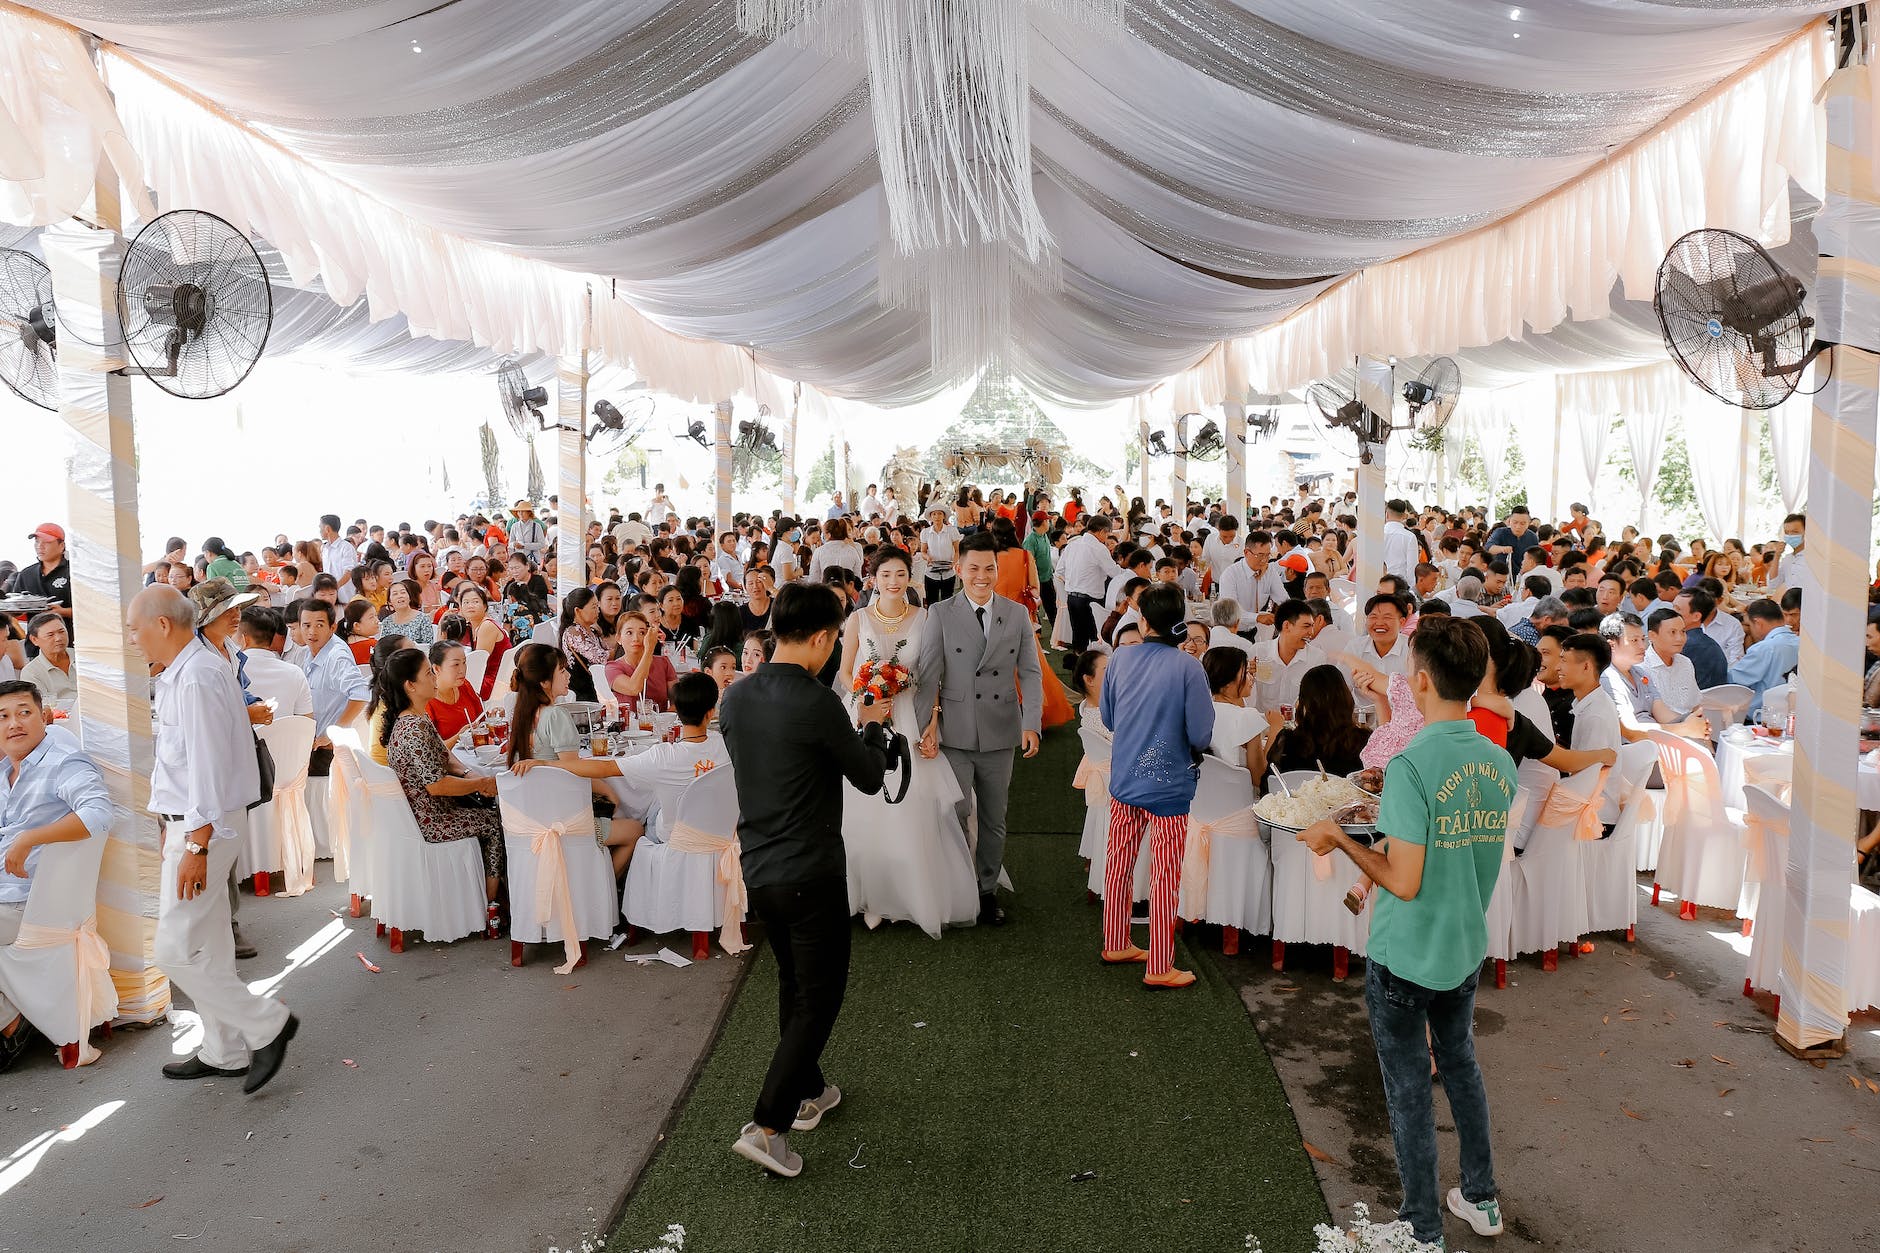 group of people on wedding banquet